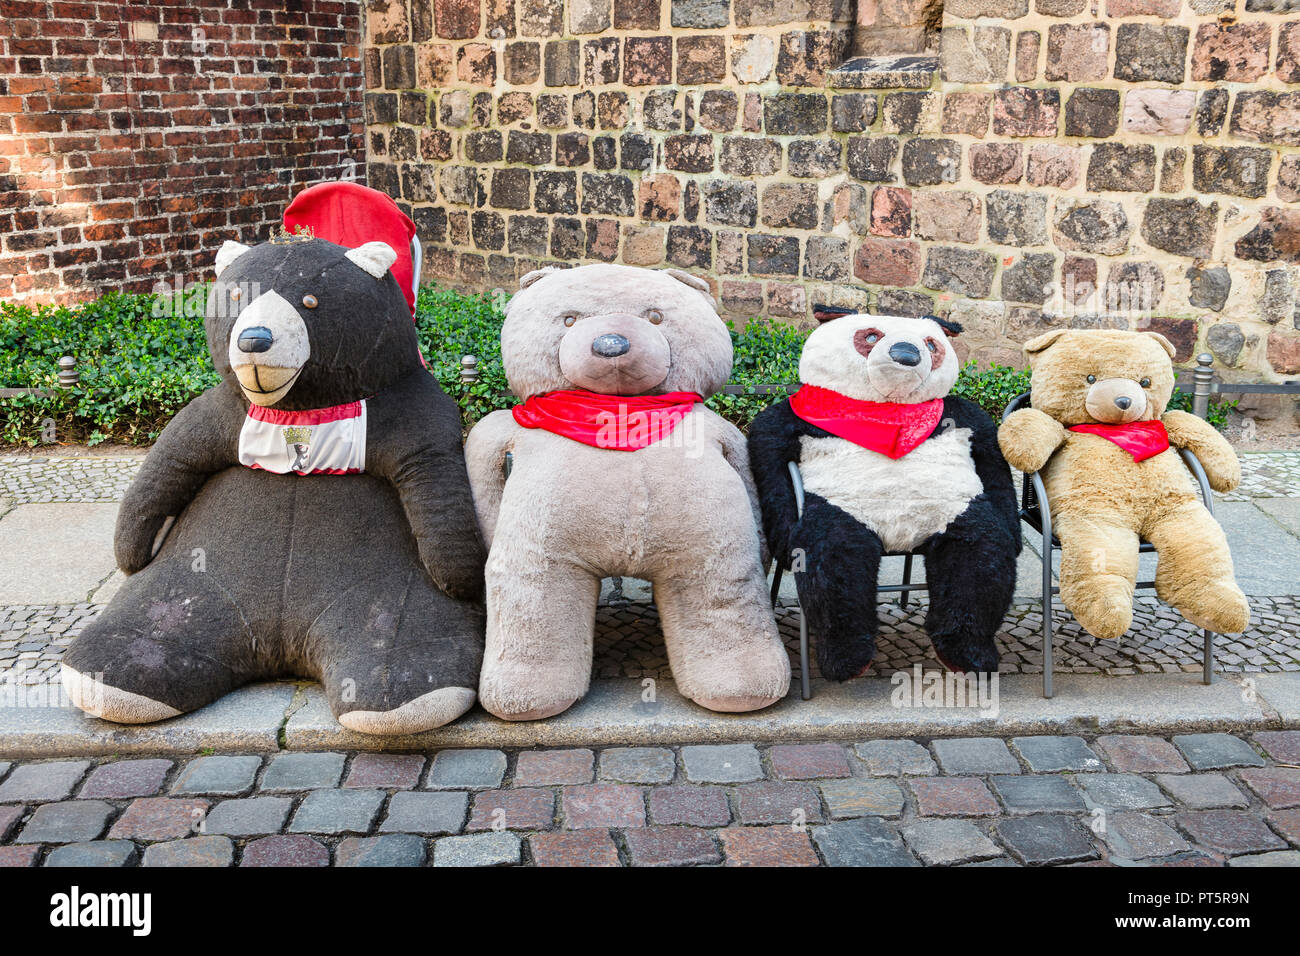 A line of well loved Teddy Bears brighten up a street in Nikolaiviertel Nicholas' Quarter, the old centre of Berlin, Germany. Stock Photo